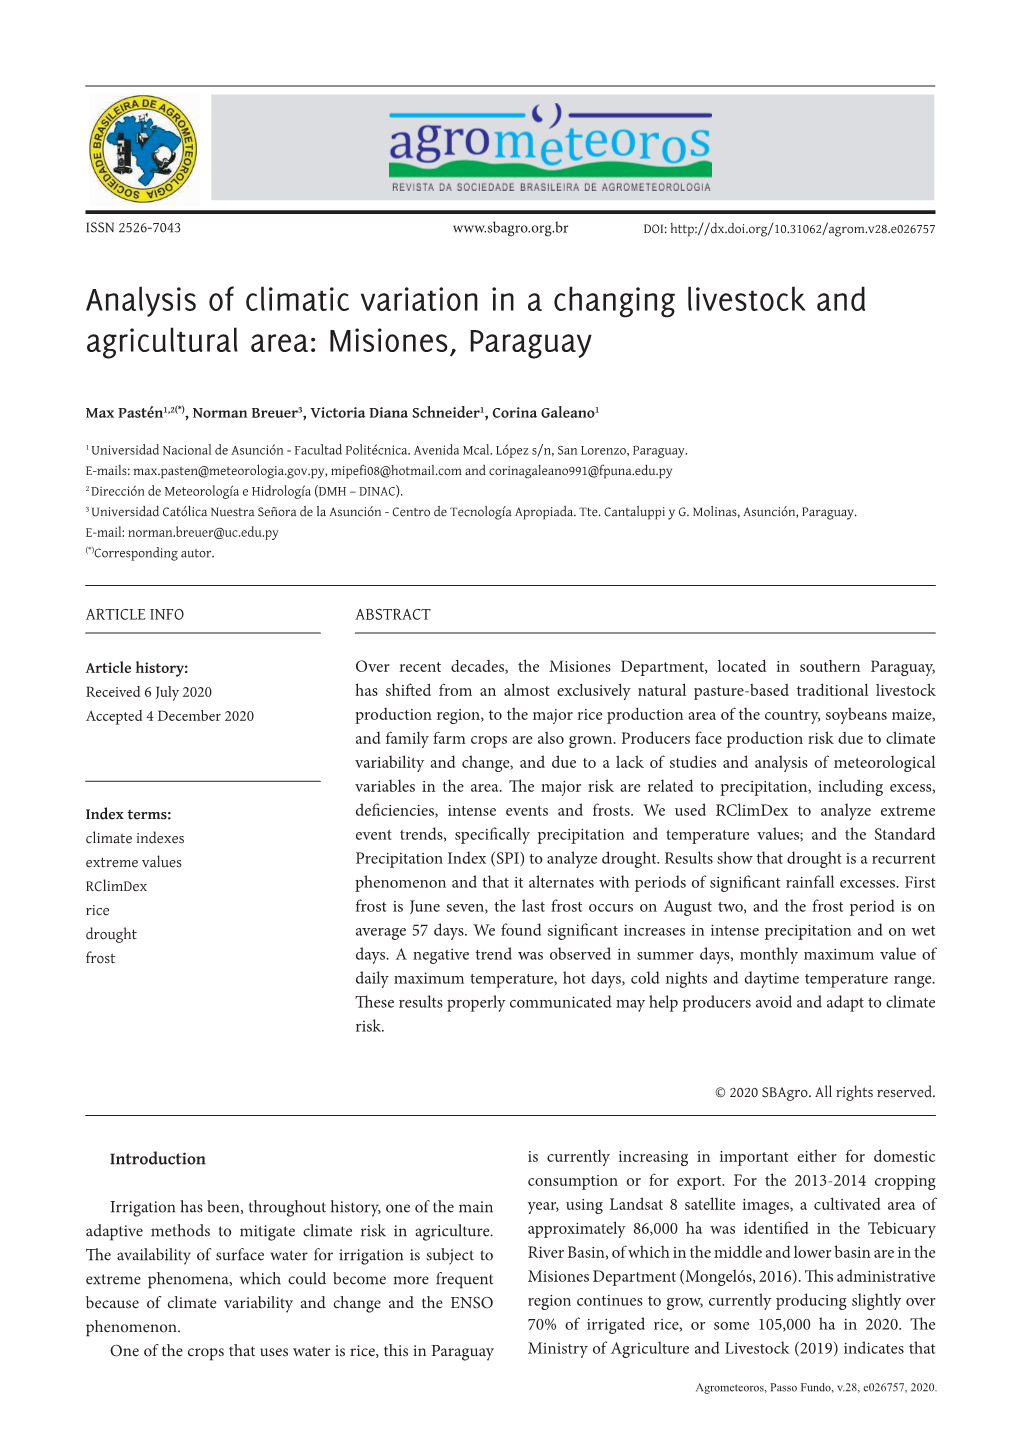 Analysis of Climatic Variation in a Changing Livestock and Agricultural Area: Misiones, Paraguay